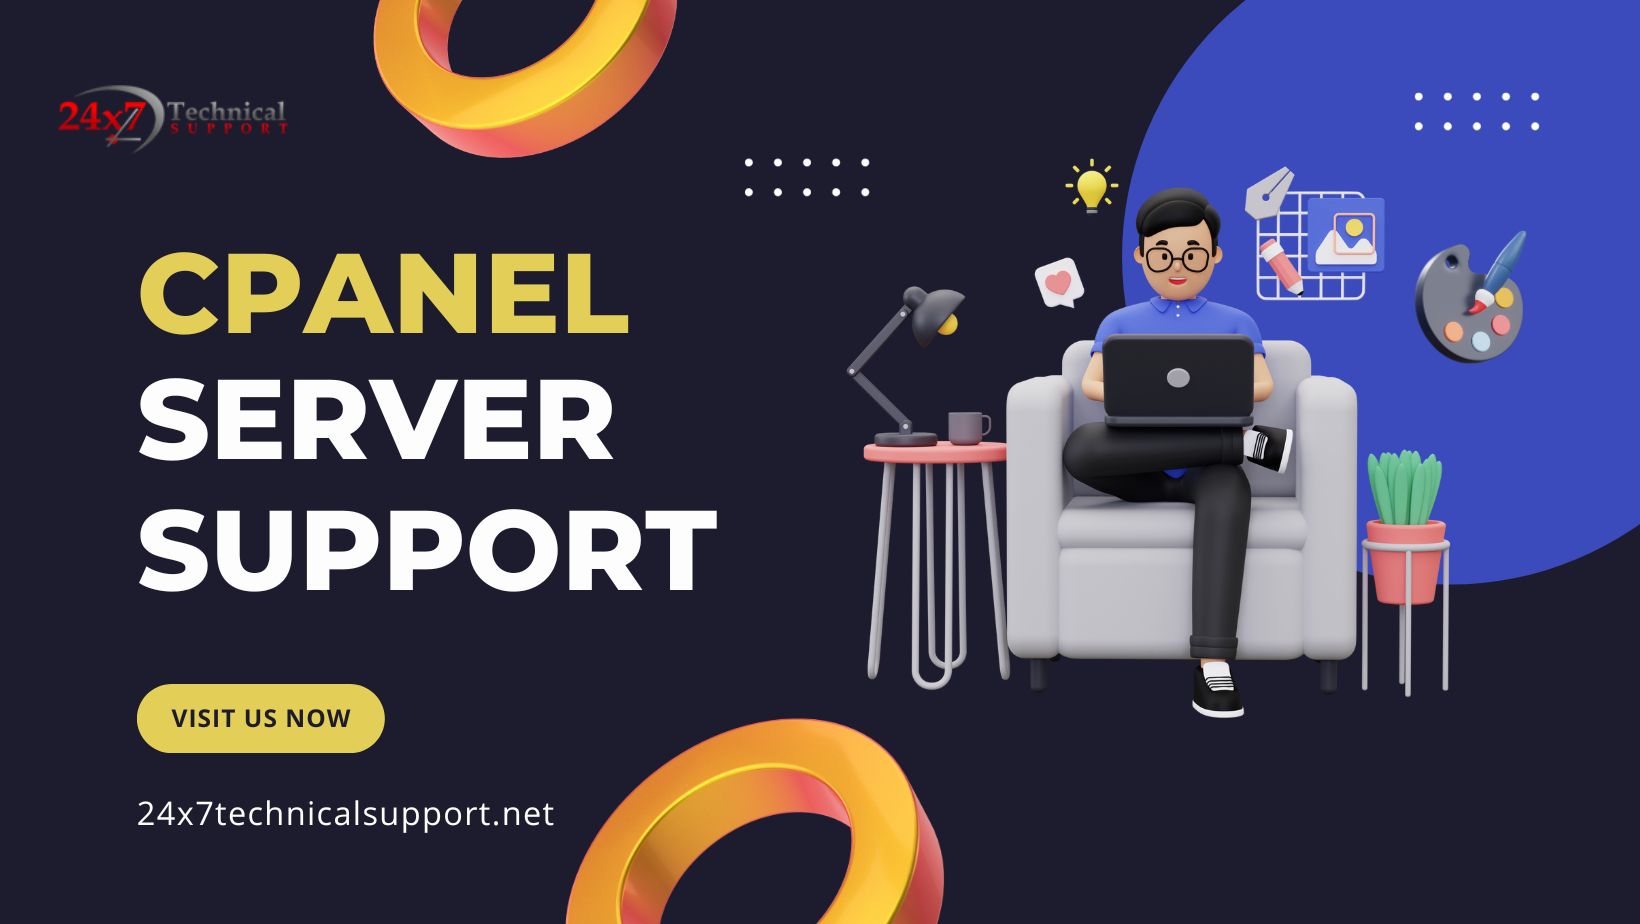 24x7 technical support cPanel server Management